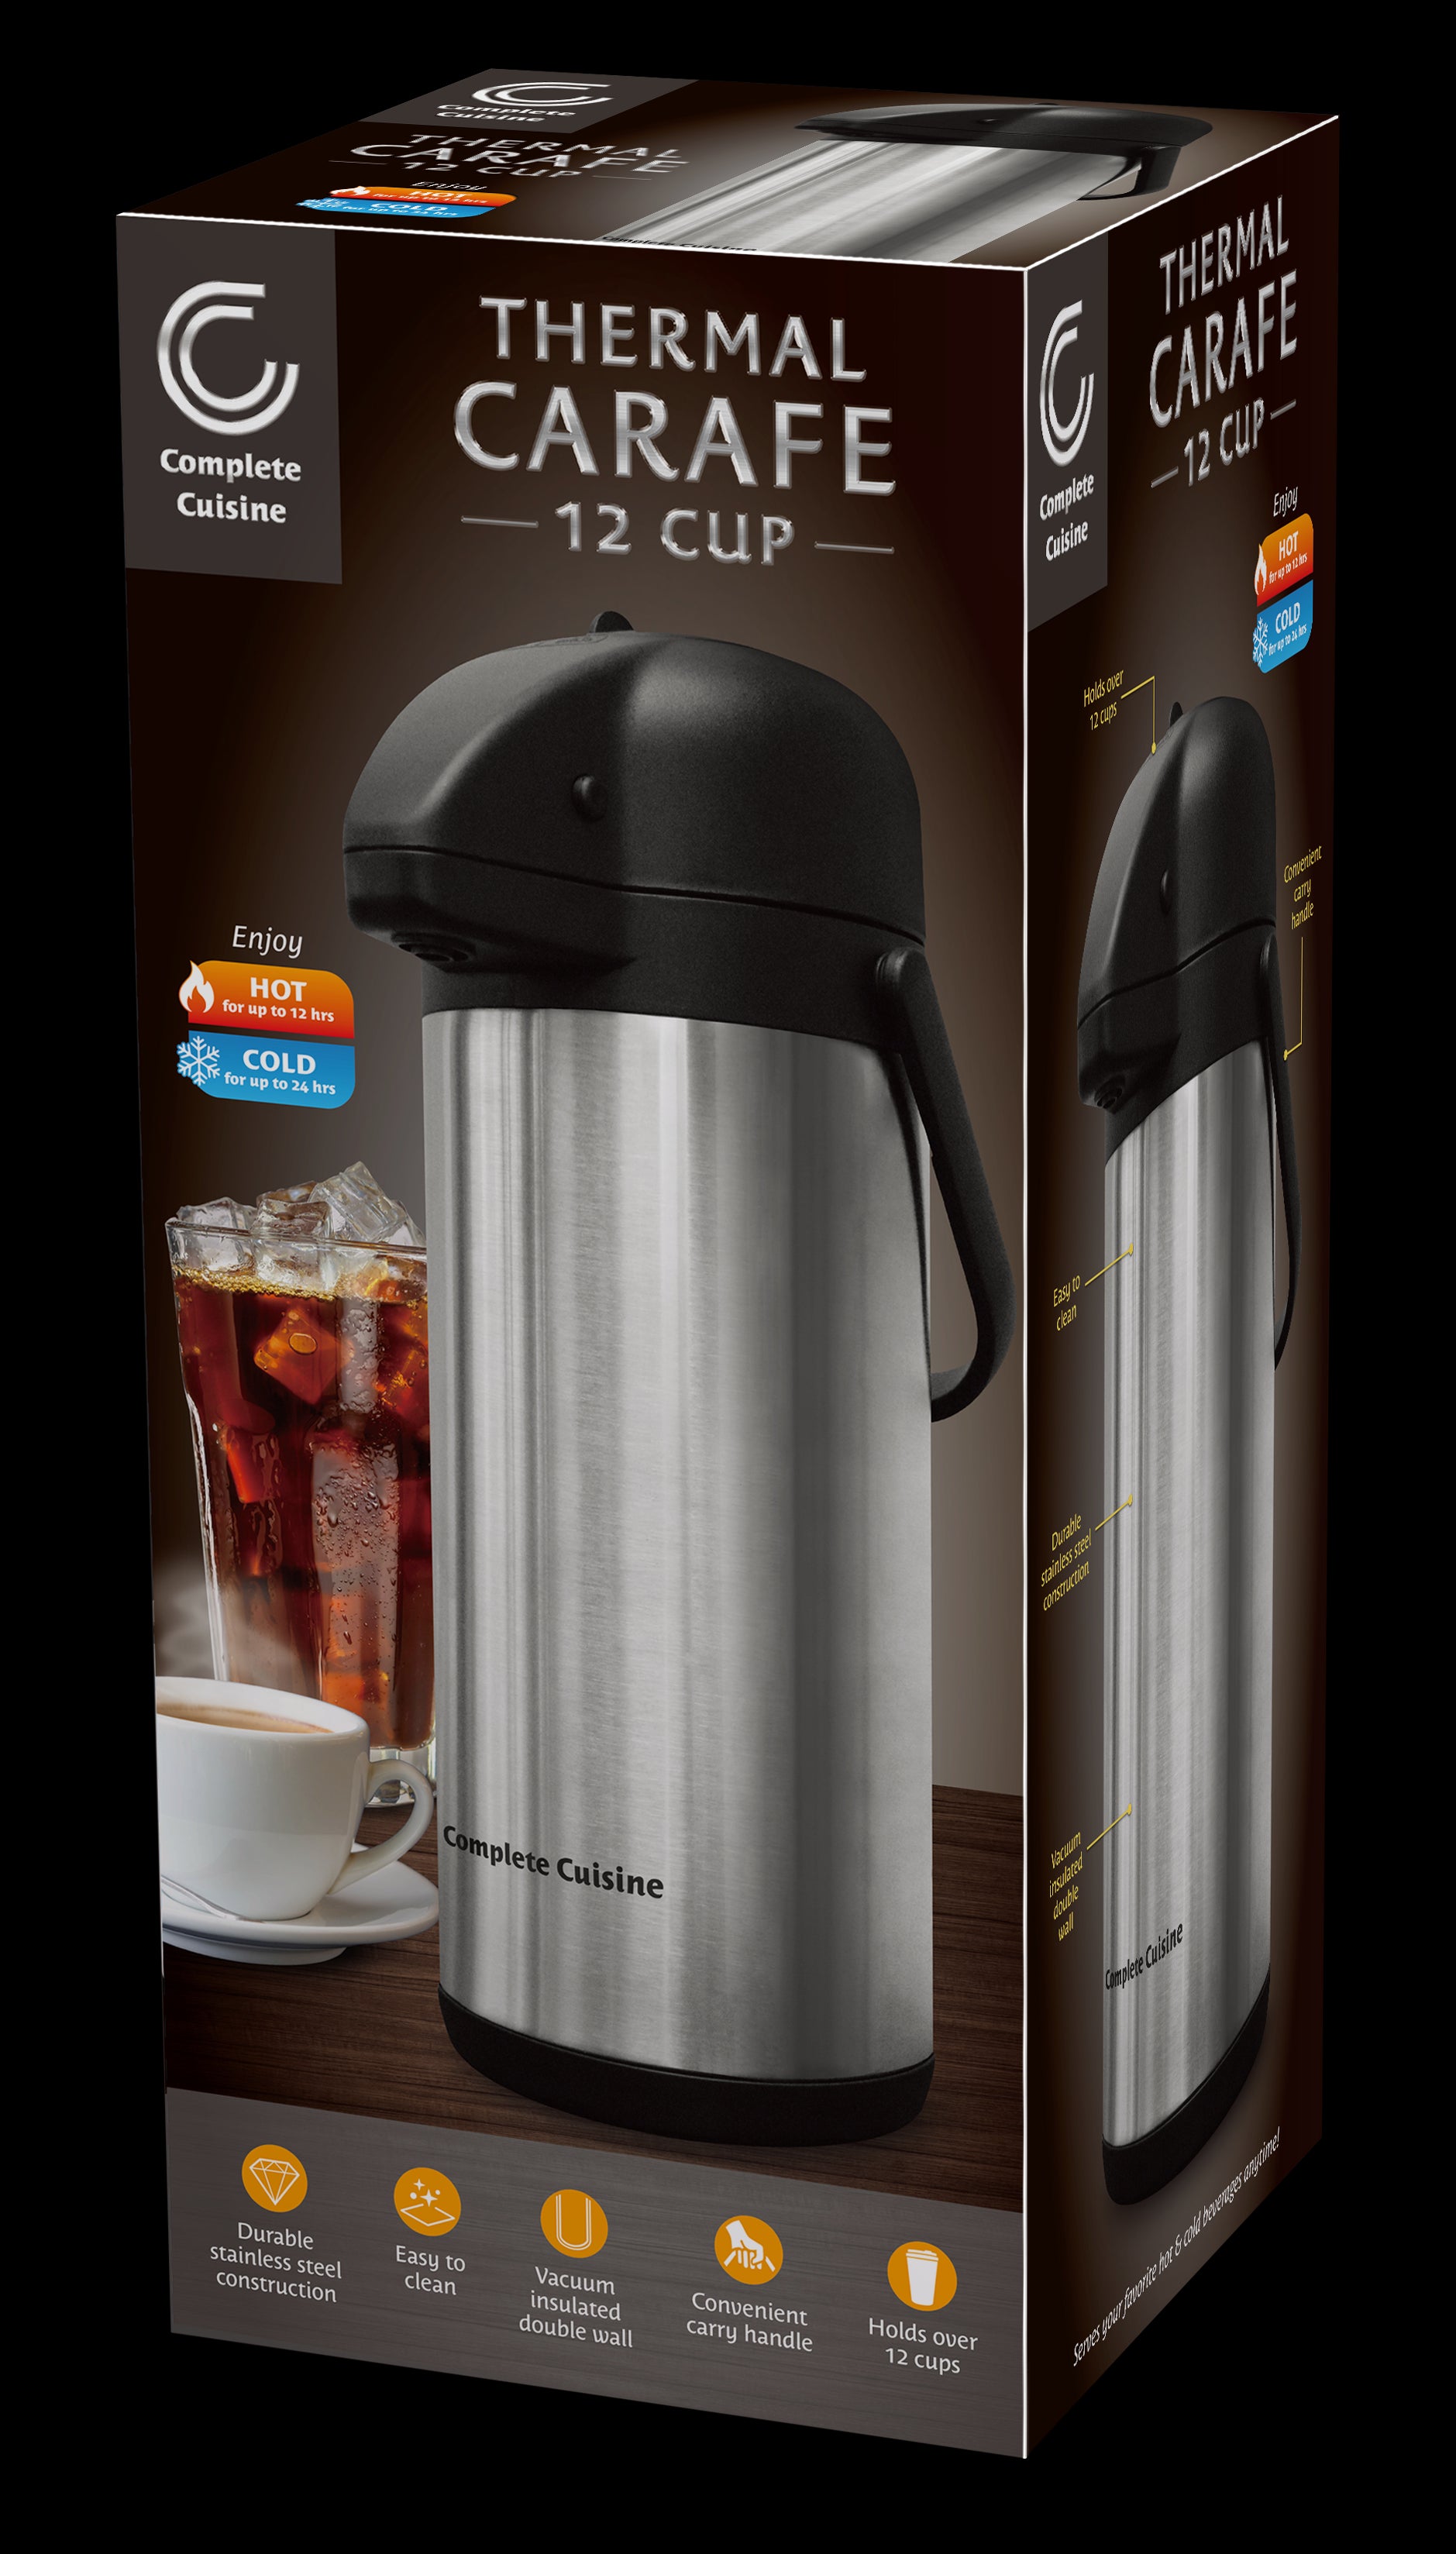 Thermal Carafe 3L Stainless Steel, Hot Water Dispenser for Coffee and Tea, 12 Hour Heat 24 Hour Cold Retention